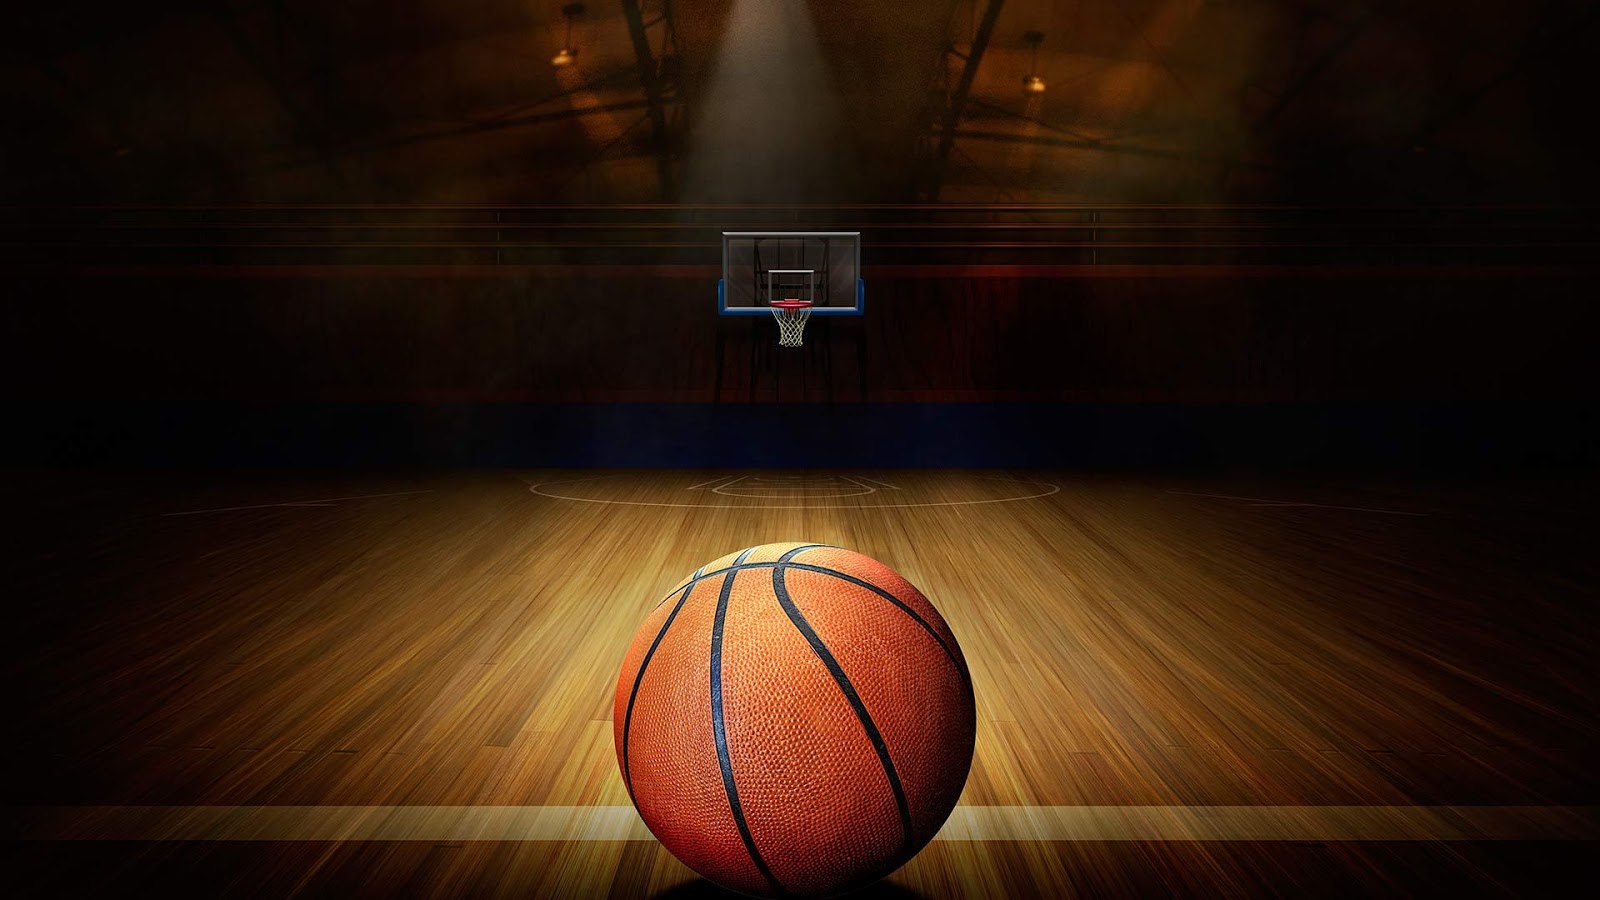 Basketball Wallpapers Download